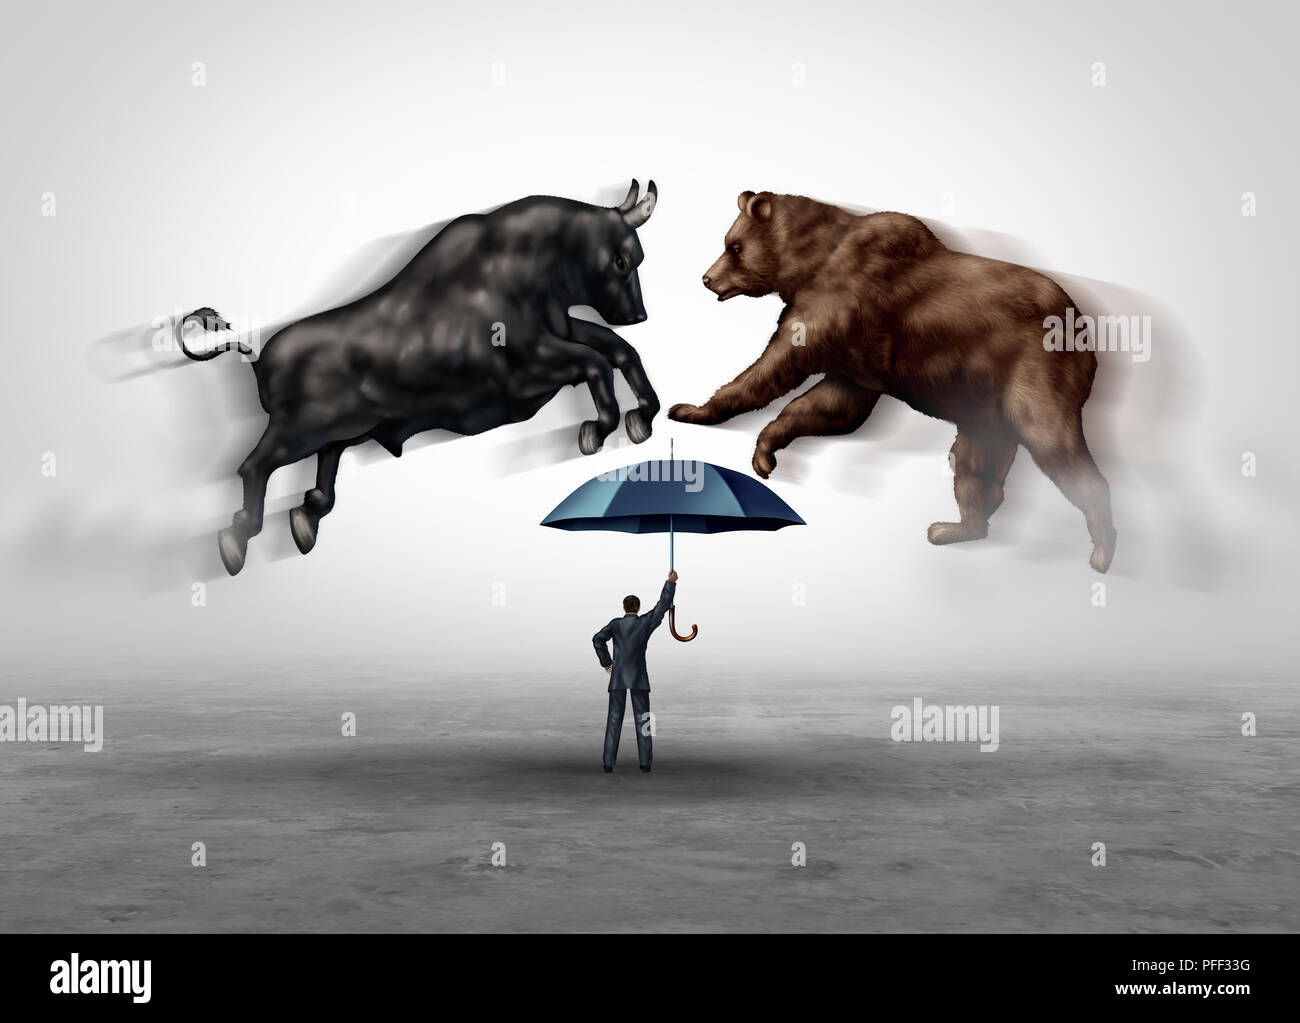 Stock market crash security and financial economic risk protection with bear and bull markets as a trading equities hazard metaphor. Stock Photo